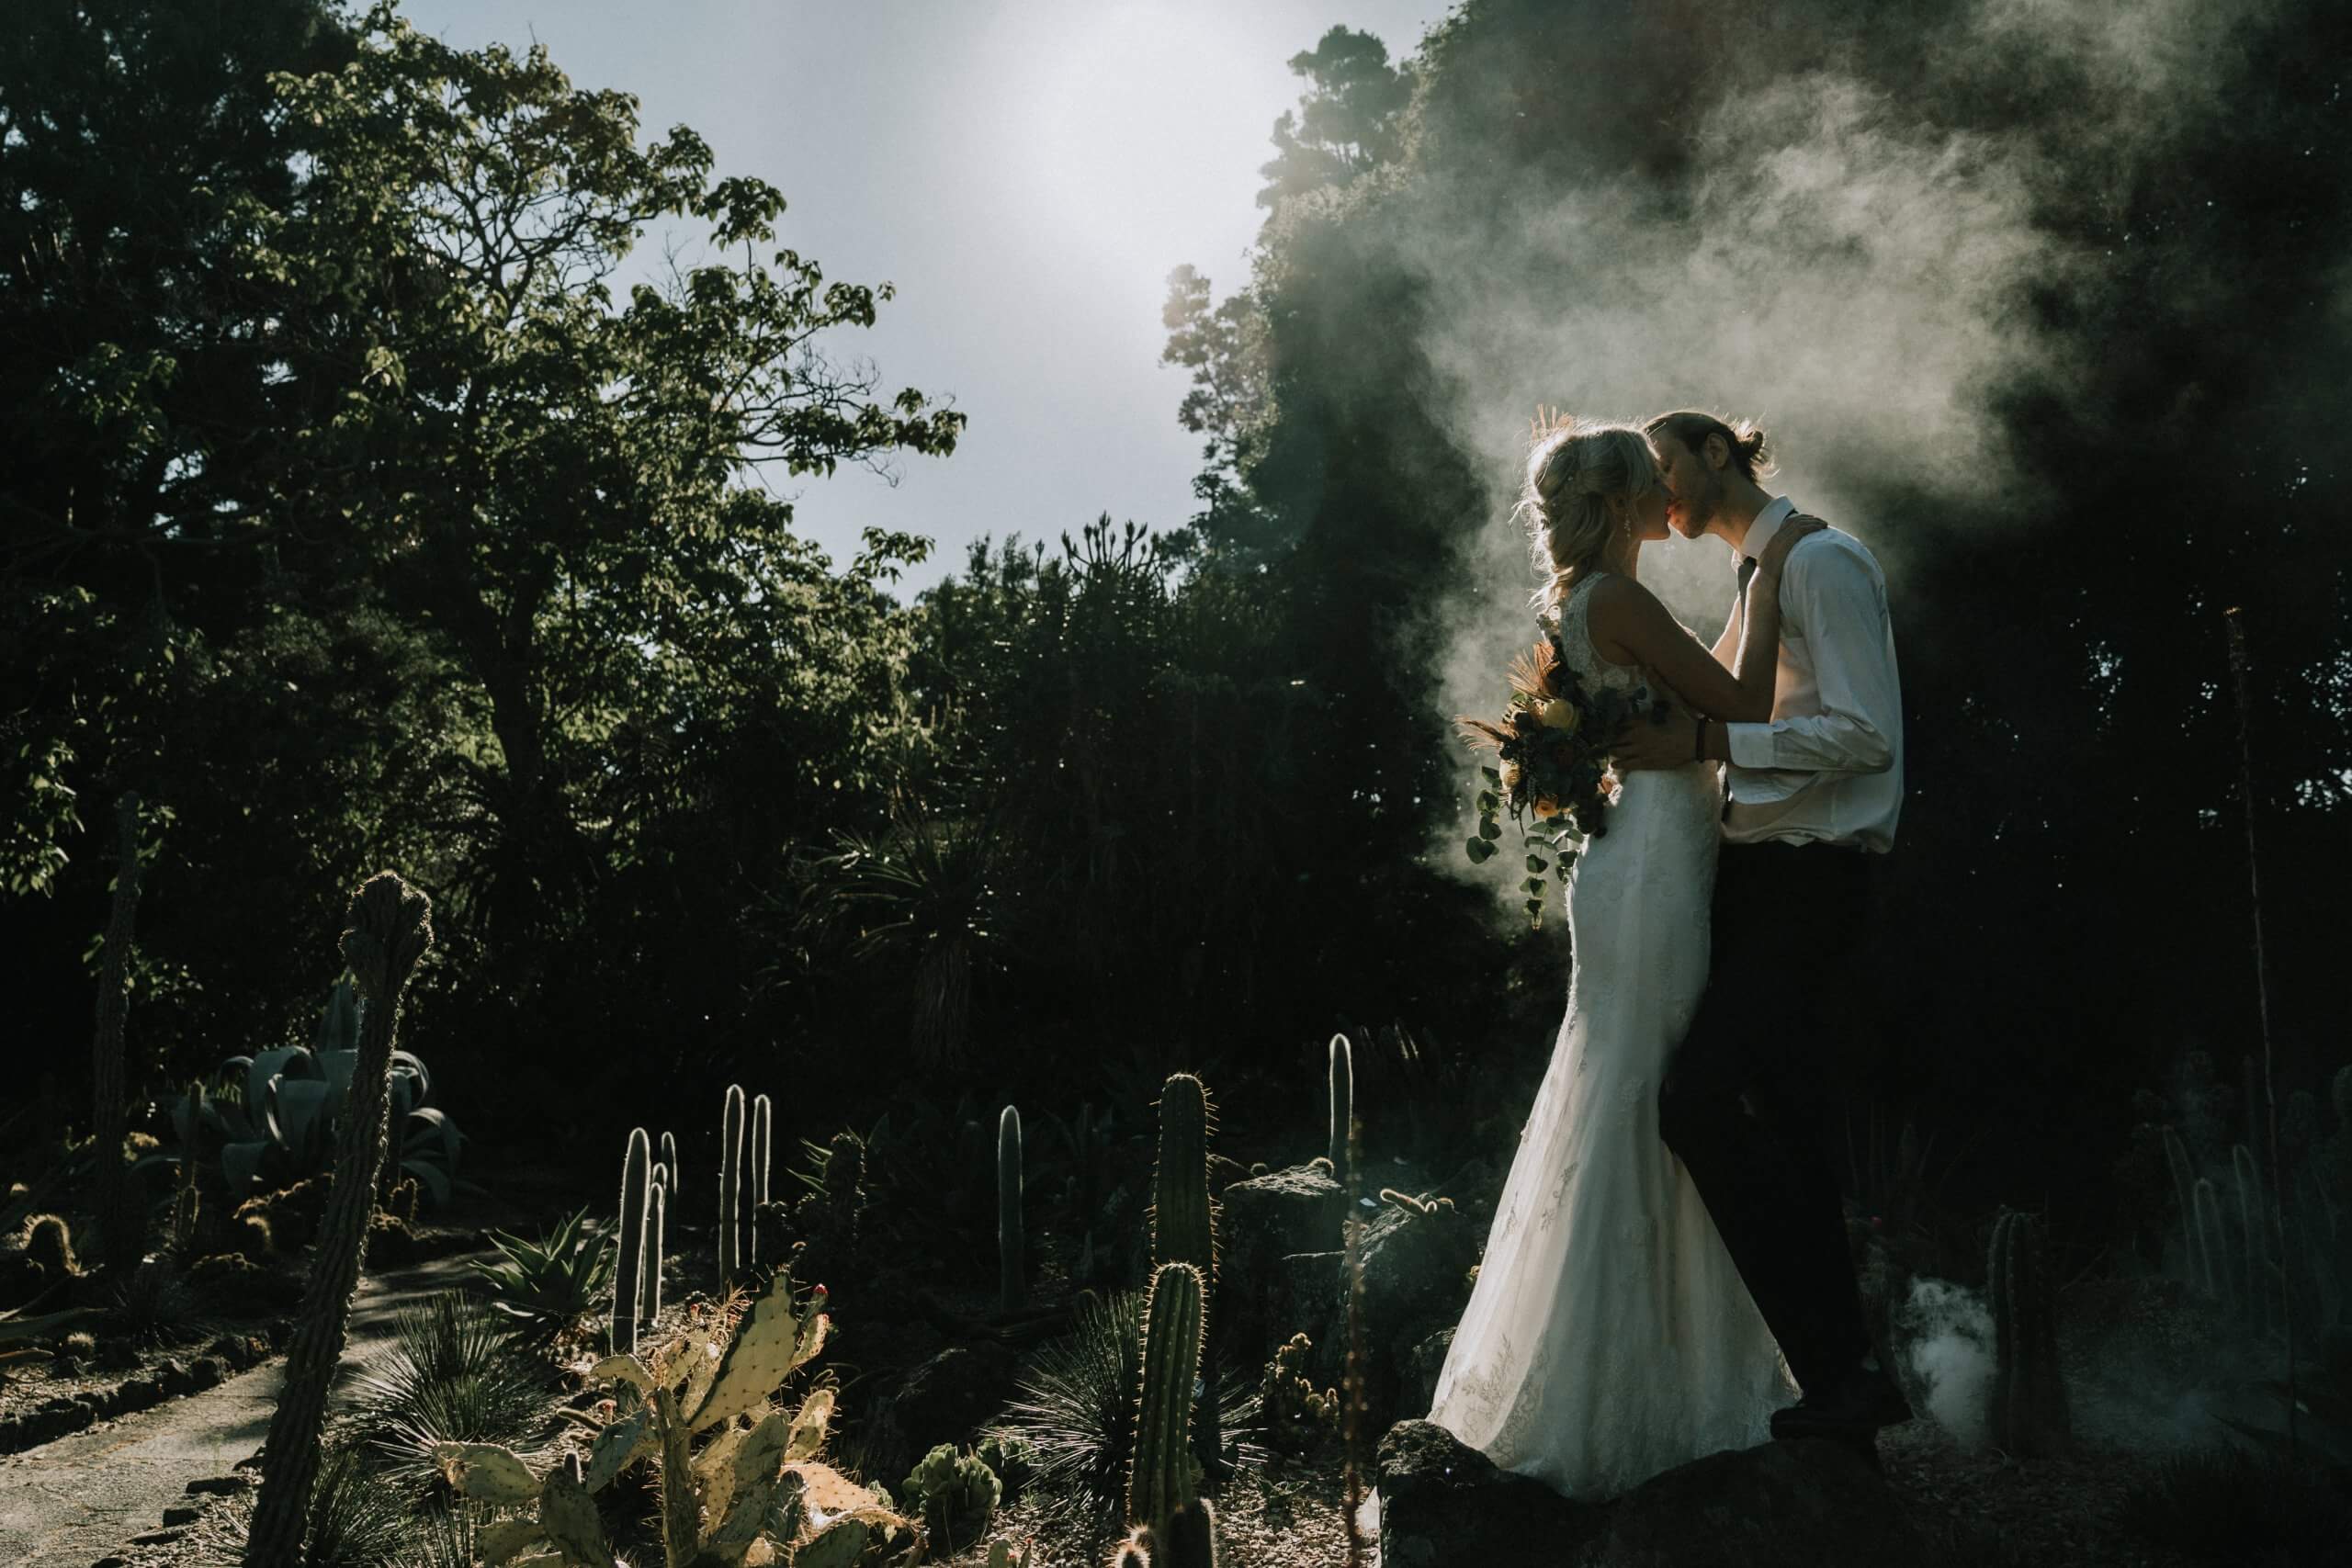 Narrative Portraiture - The bride and groom share a kiss in front of a dark, foggy forest